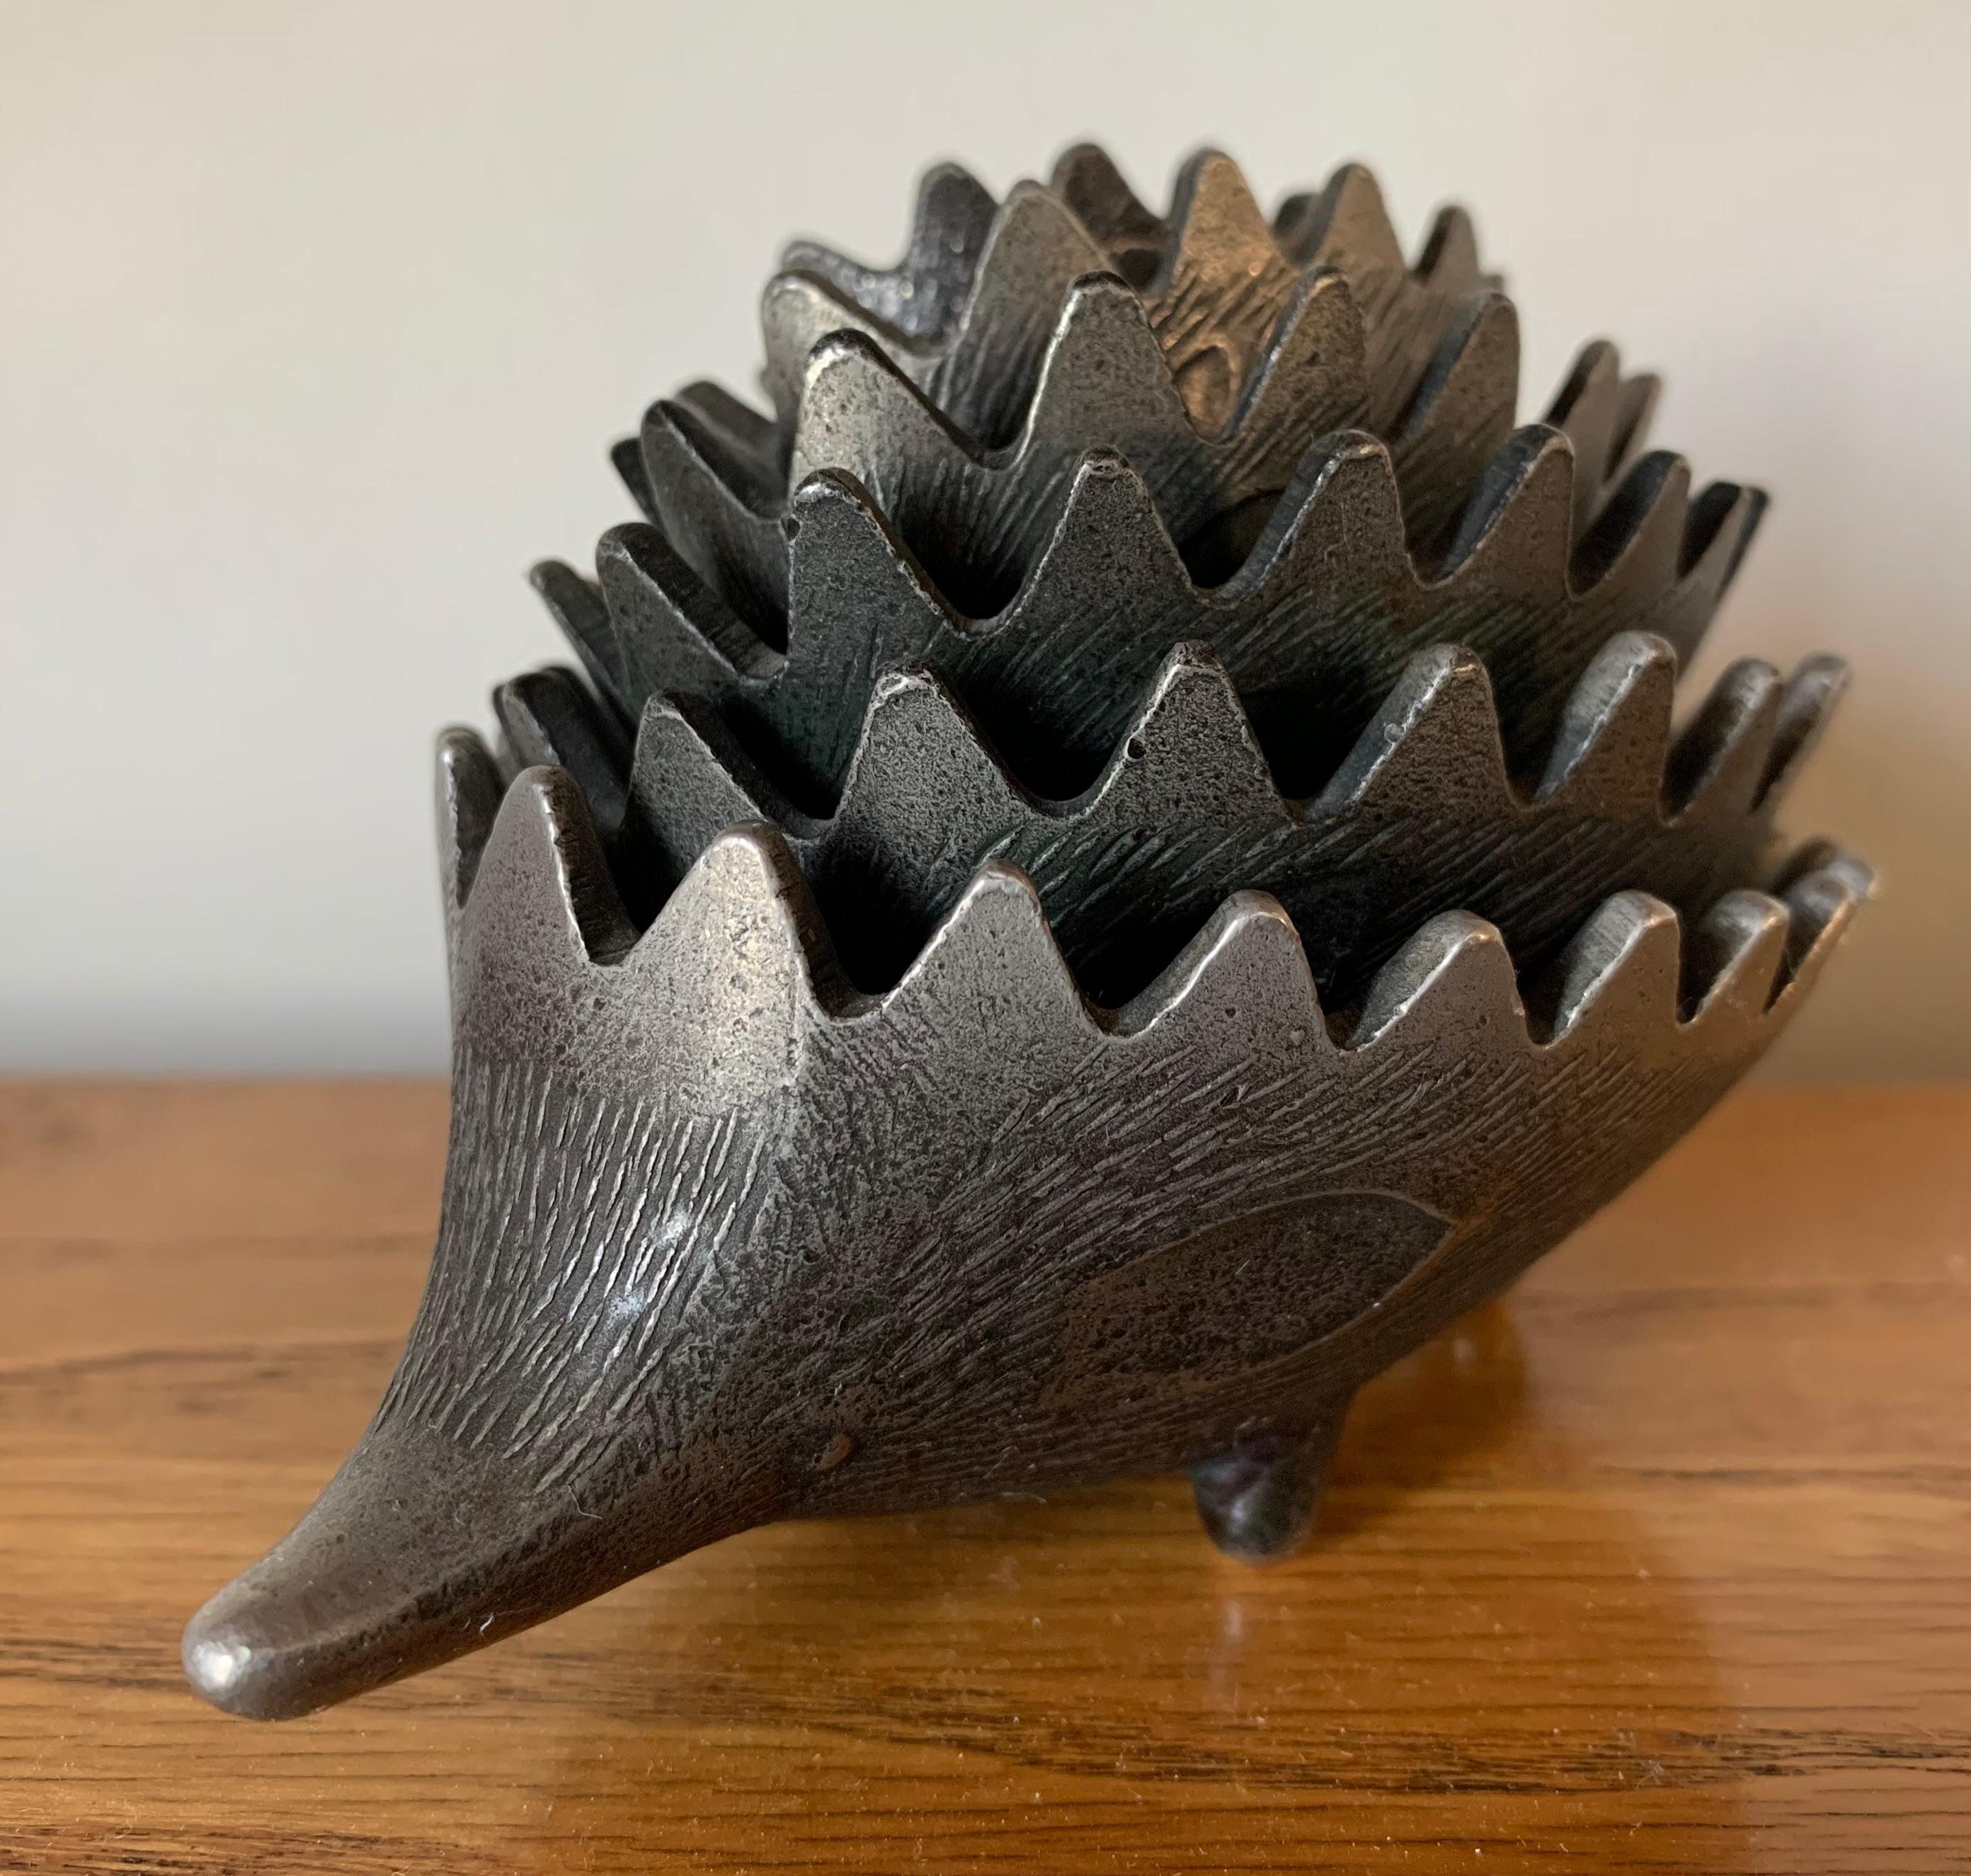 A wonderful and quirky set of 6, Walter Bosse style, Hedgehog ashtrays. The Hedgehogs are made of Zinc and this version was manufactured in Russia during the 1980s from what I've researched. Most likely to have been manufactured as promotional items